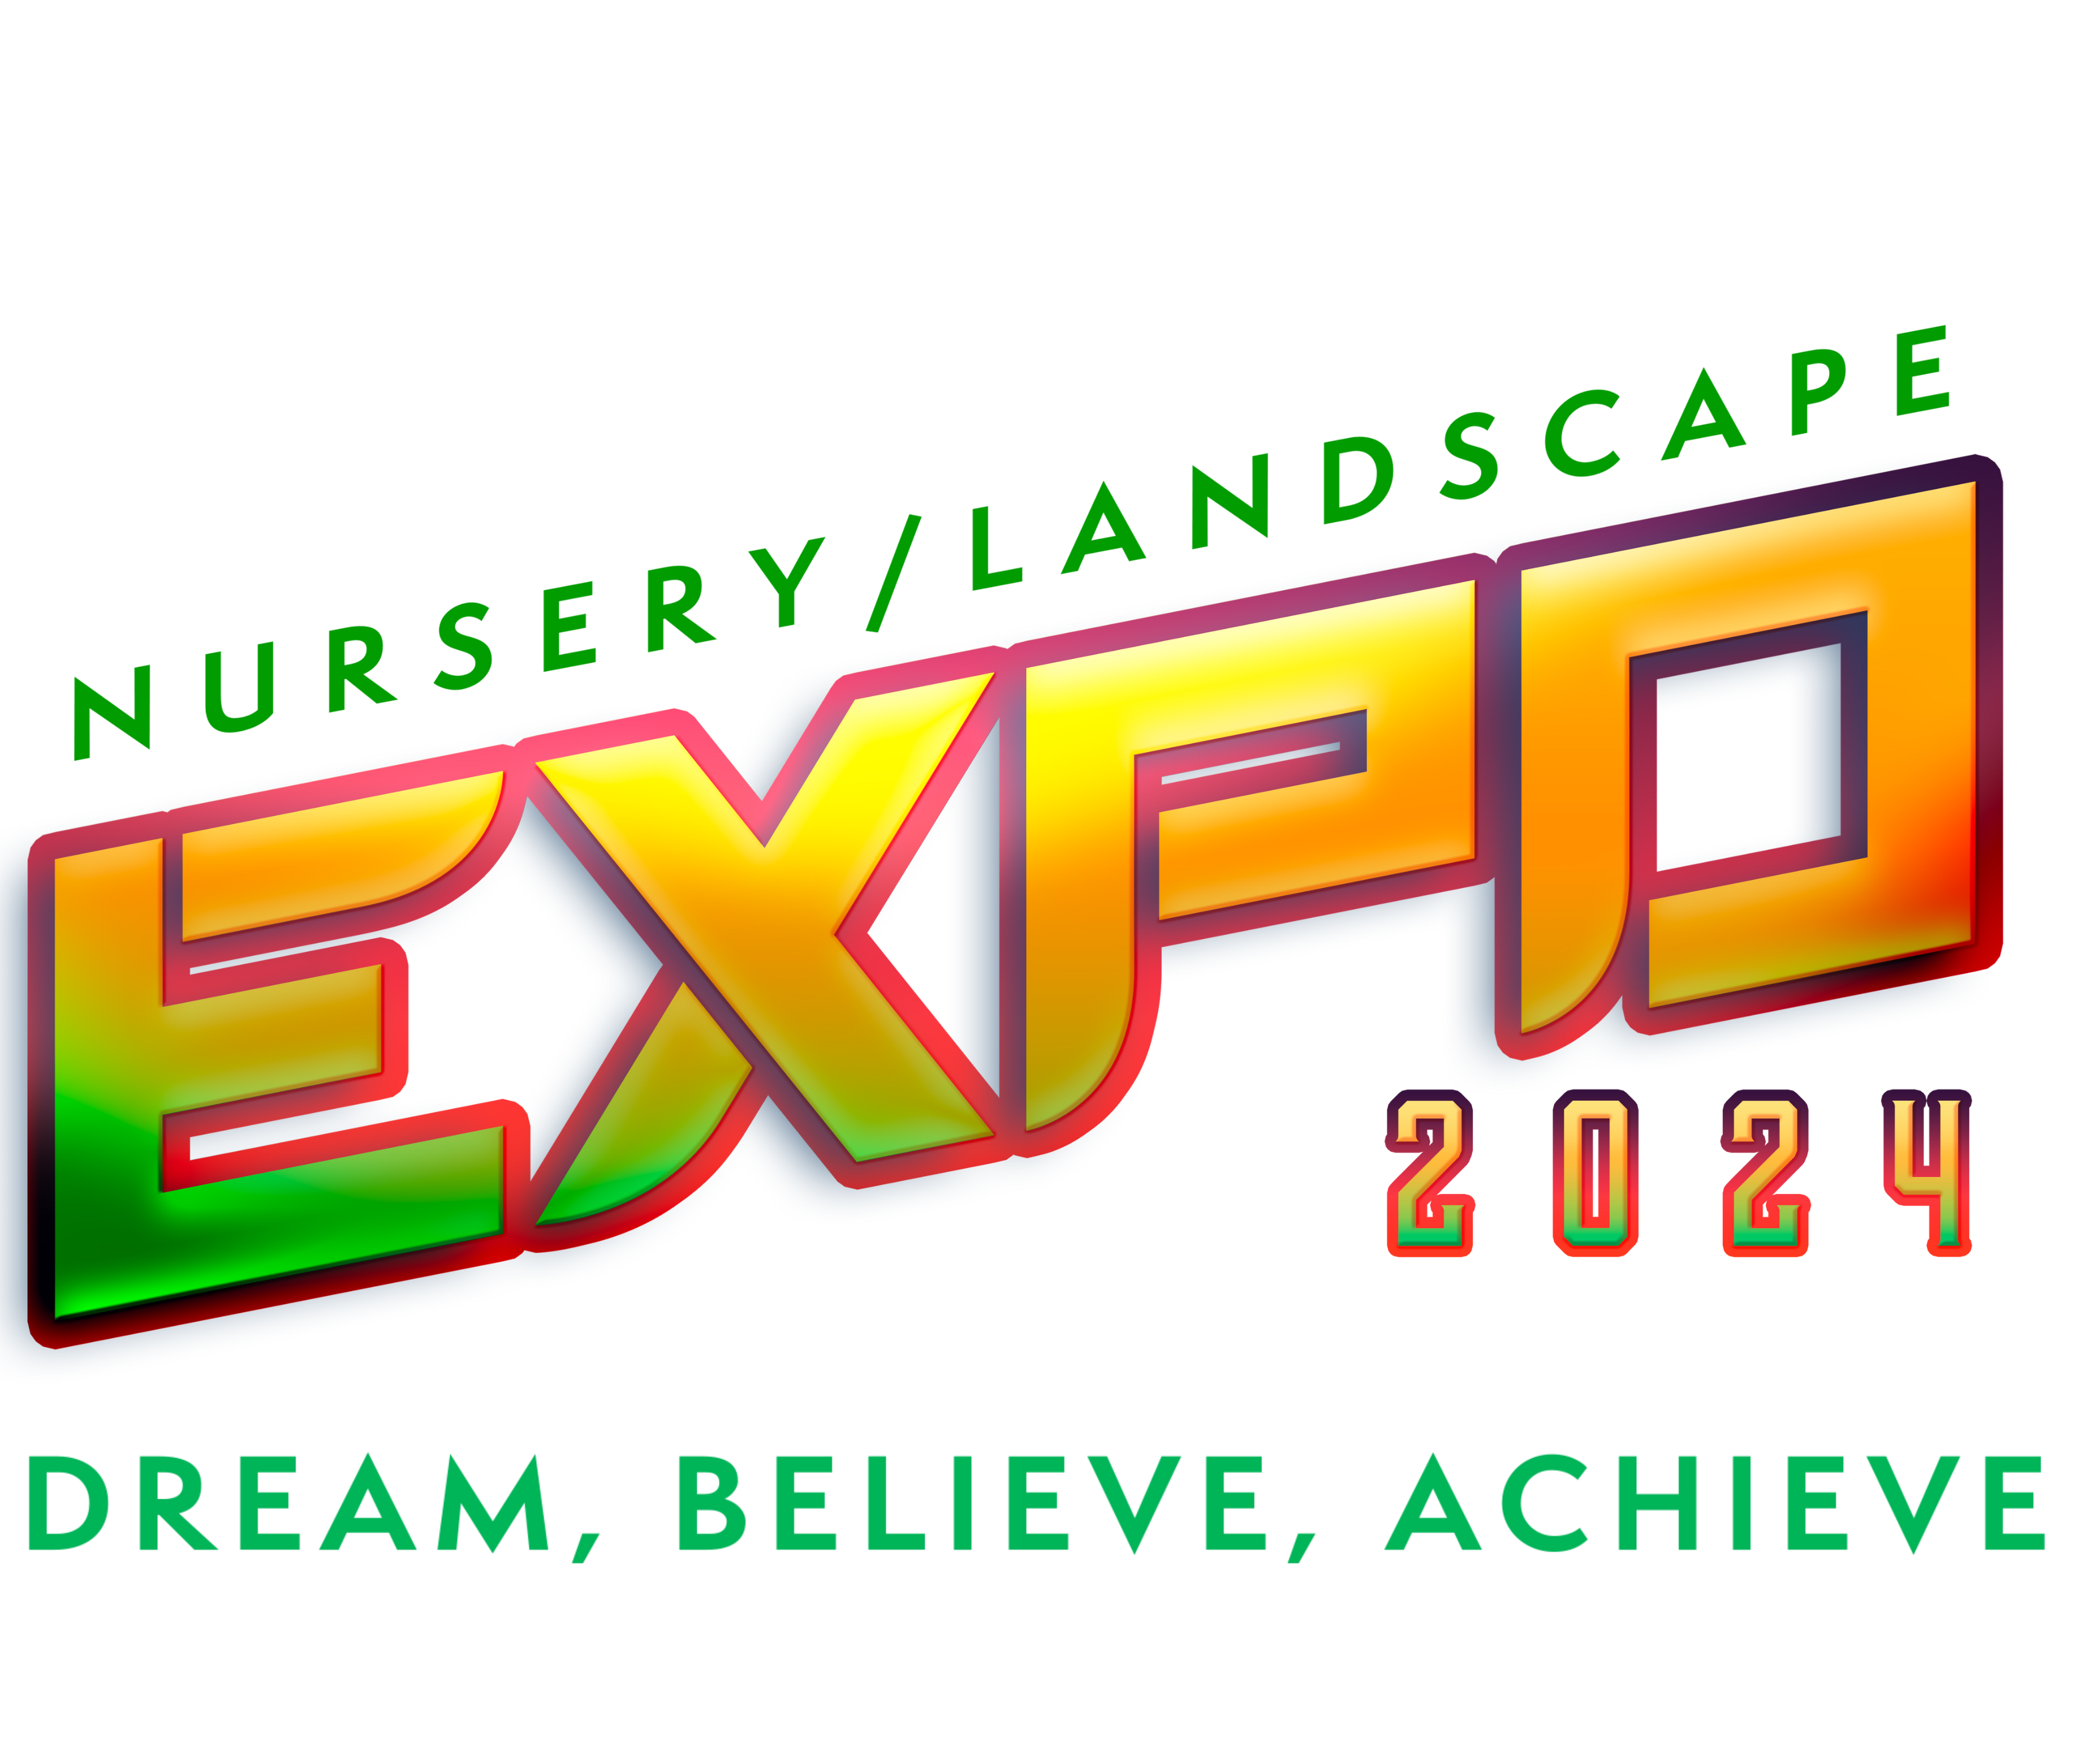 Welcome to 2024 Nursery/Landscape EXPO